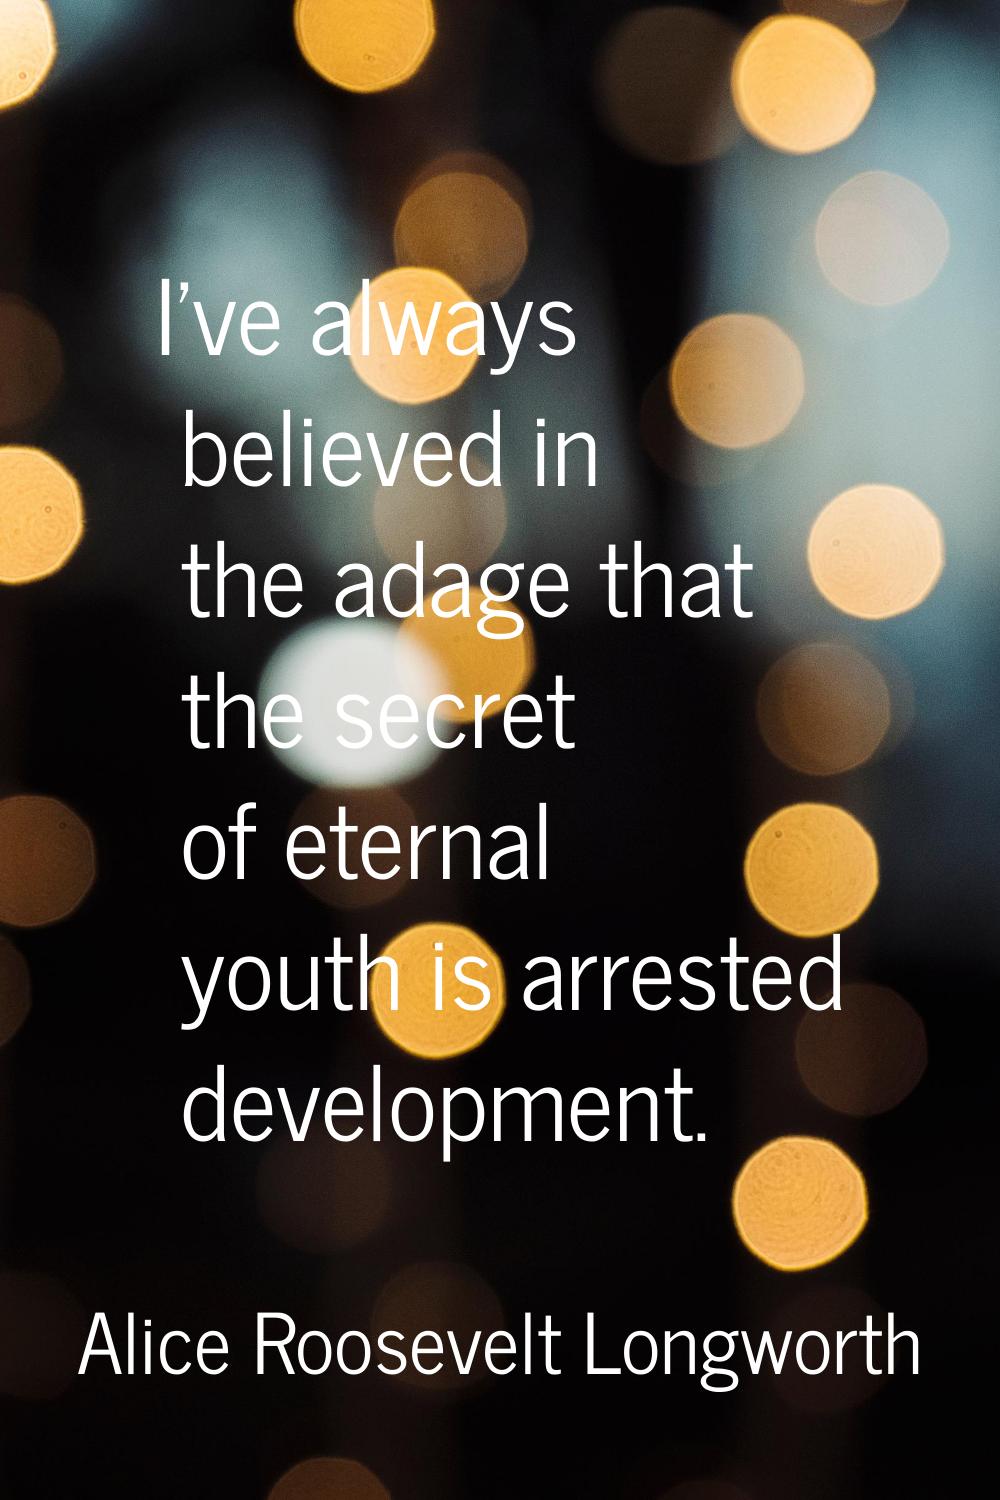 I've always believed in the adage that the secret of eternal youth is arrested development.